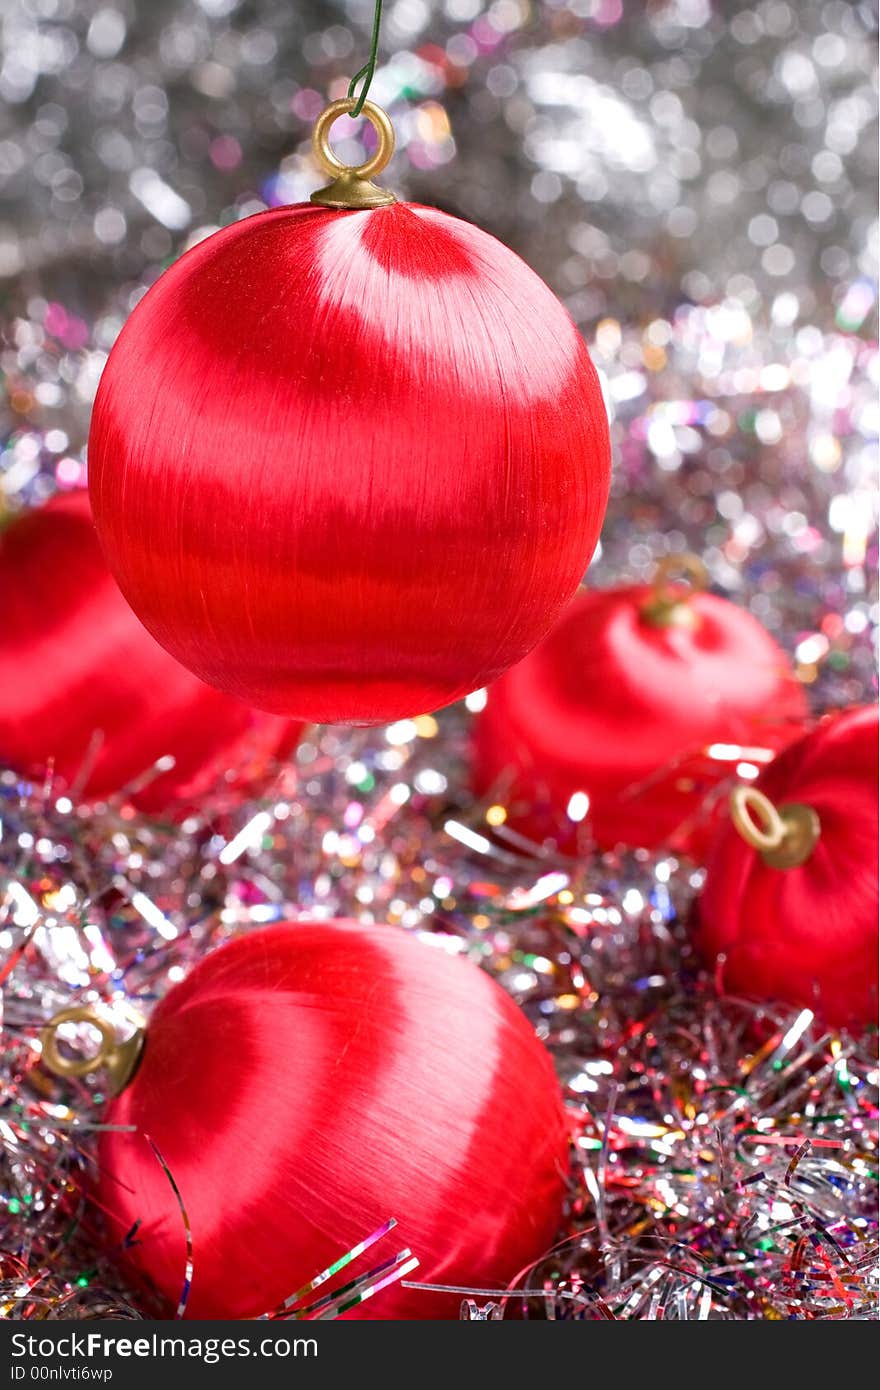 Red Christmas ornaments with multicolored glitter. Red Christmas ornaments with multicolored glitter